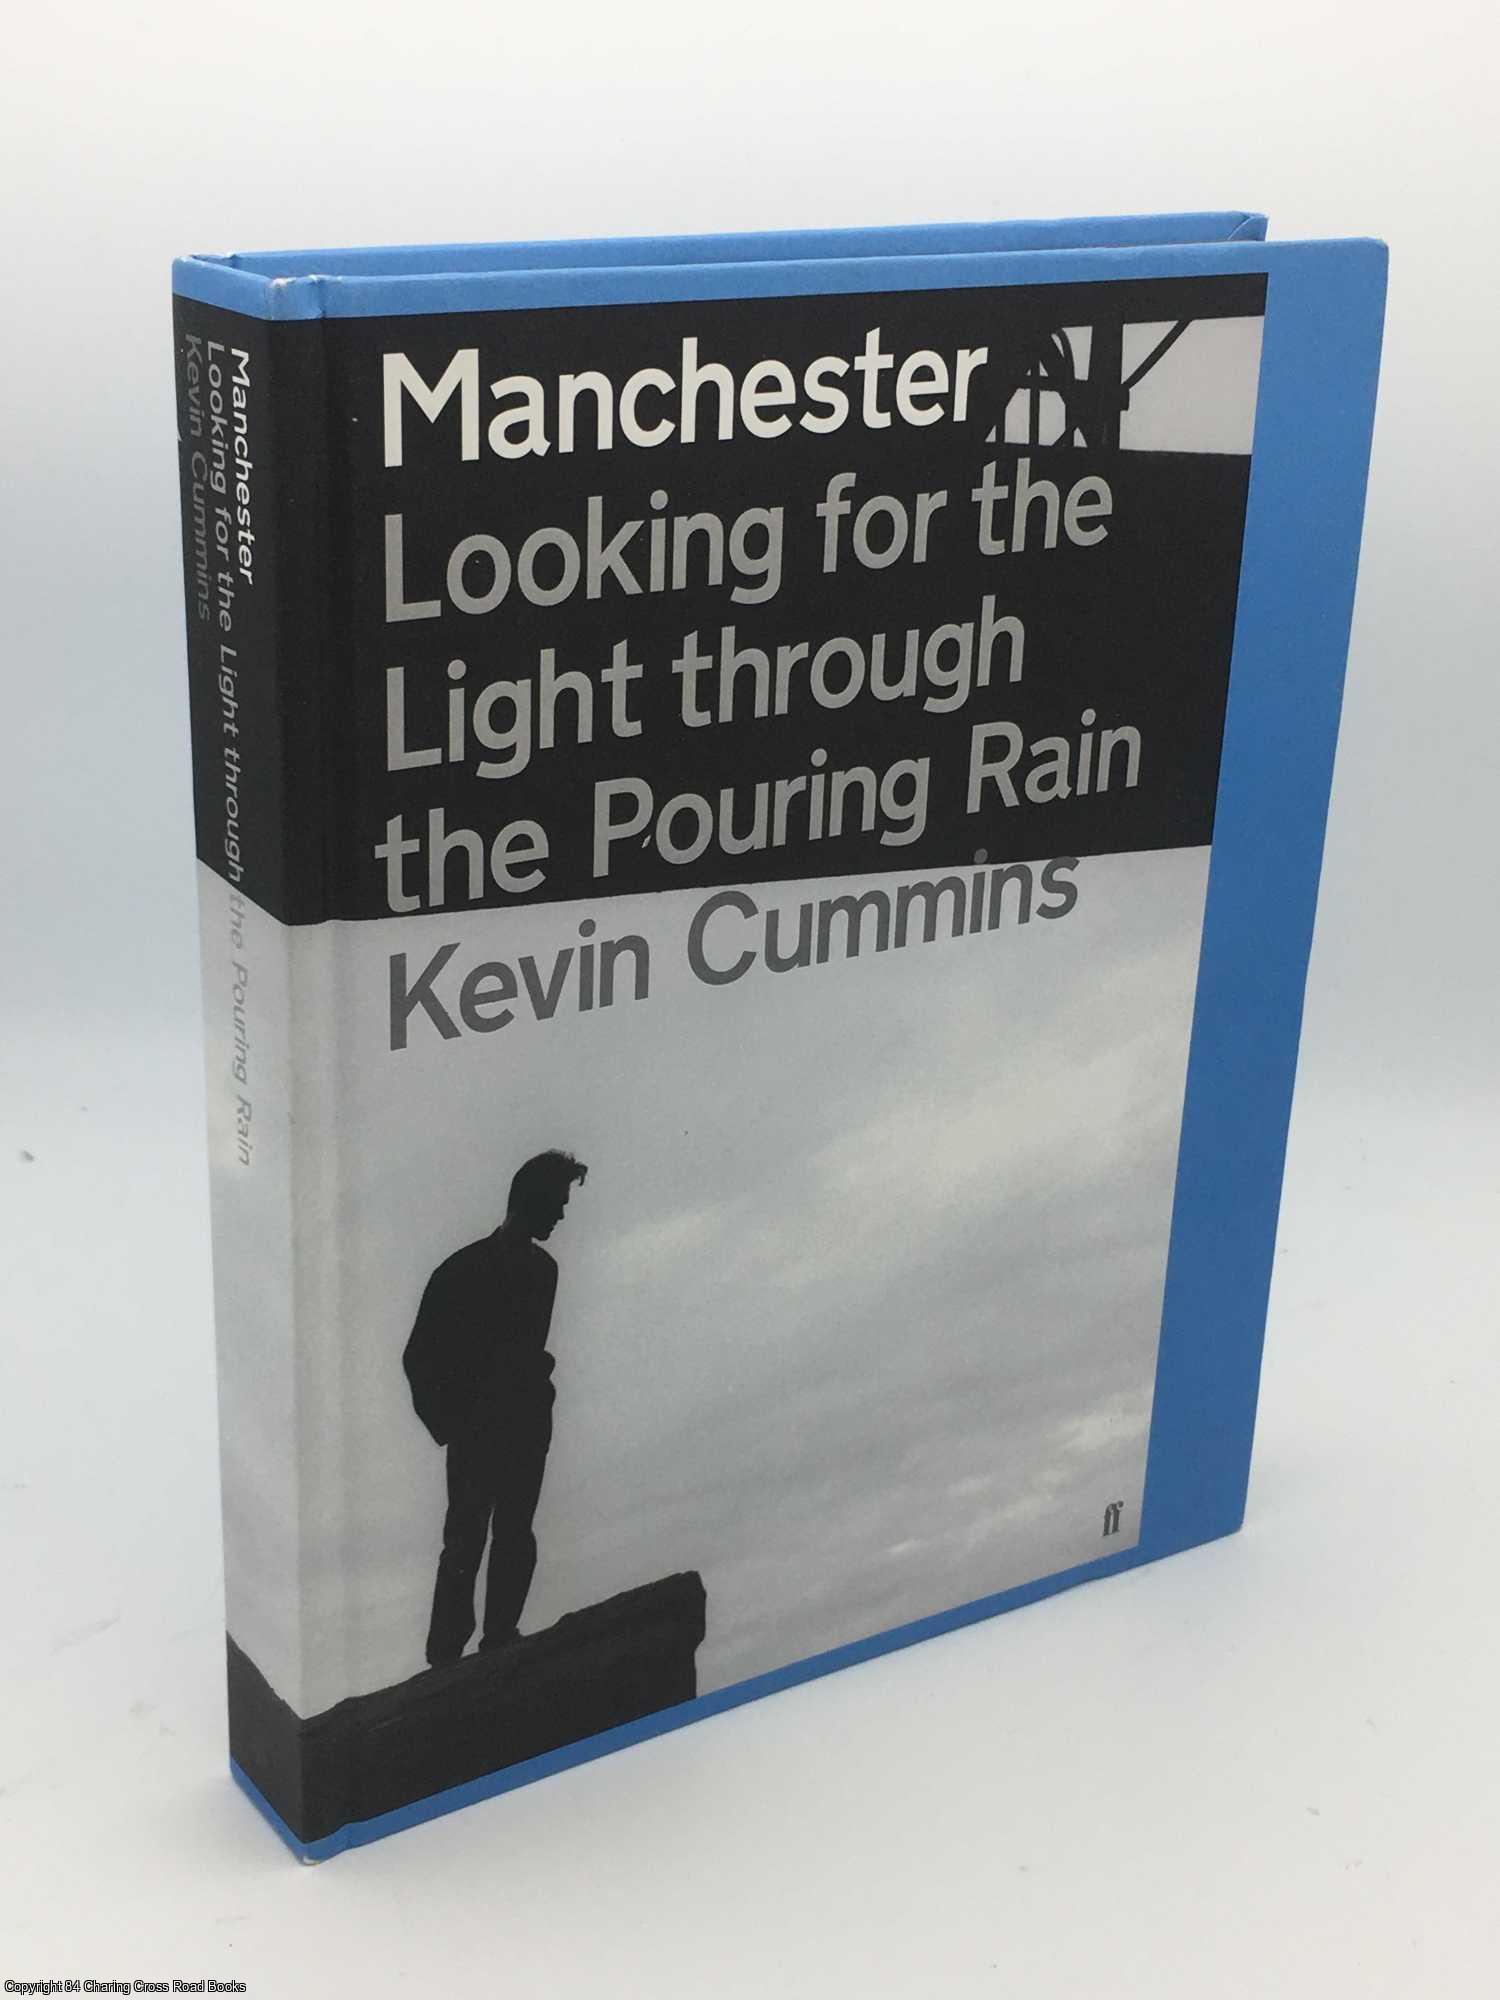 Cummins, Kevin - Manchester: Looking for the Light Through the Pouring Rain